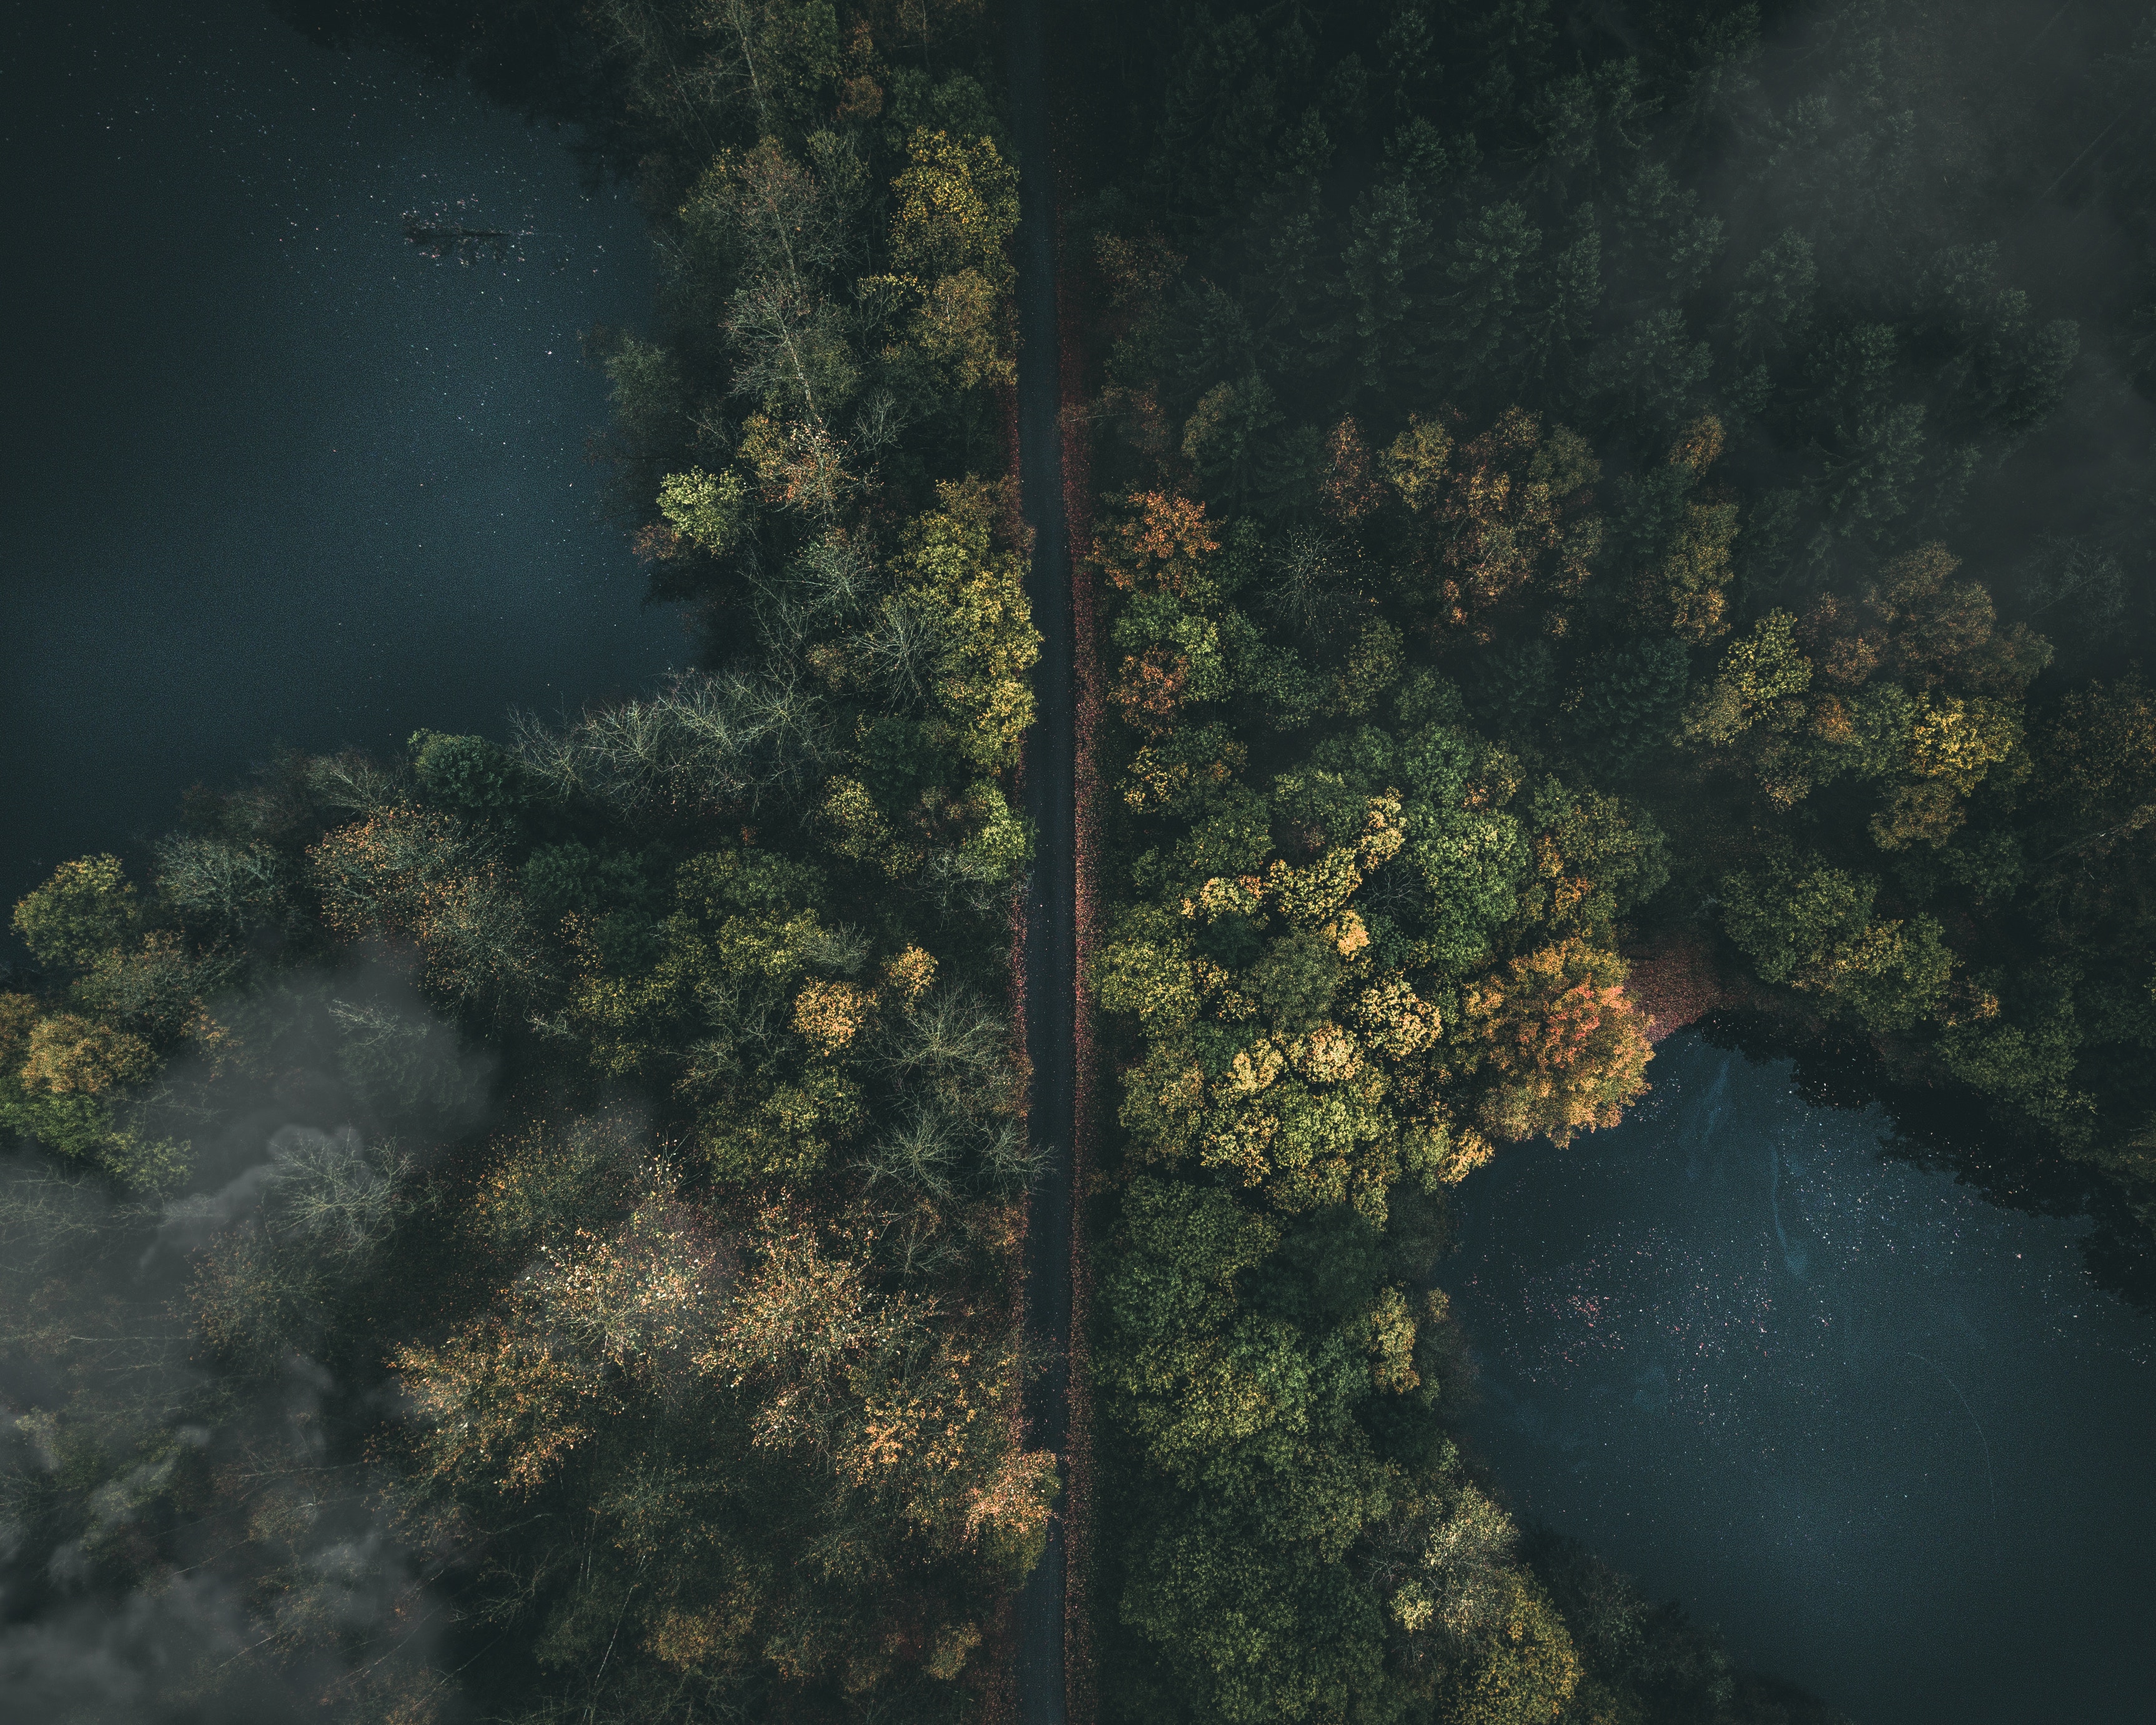 view from above, nature, road, forest, fog Desktop home screen Wallpaper